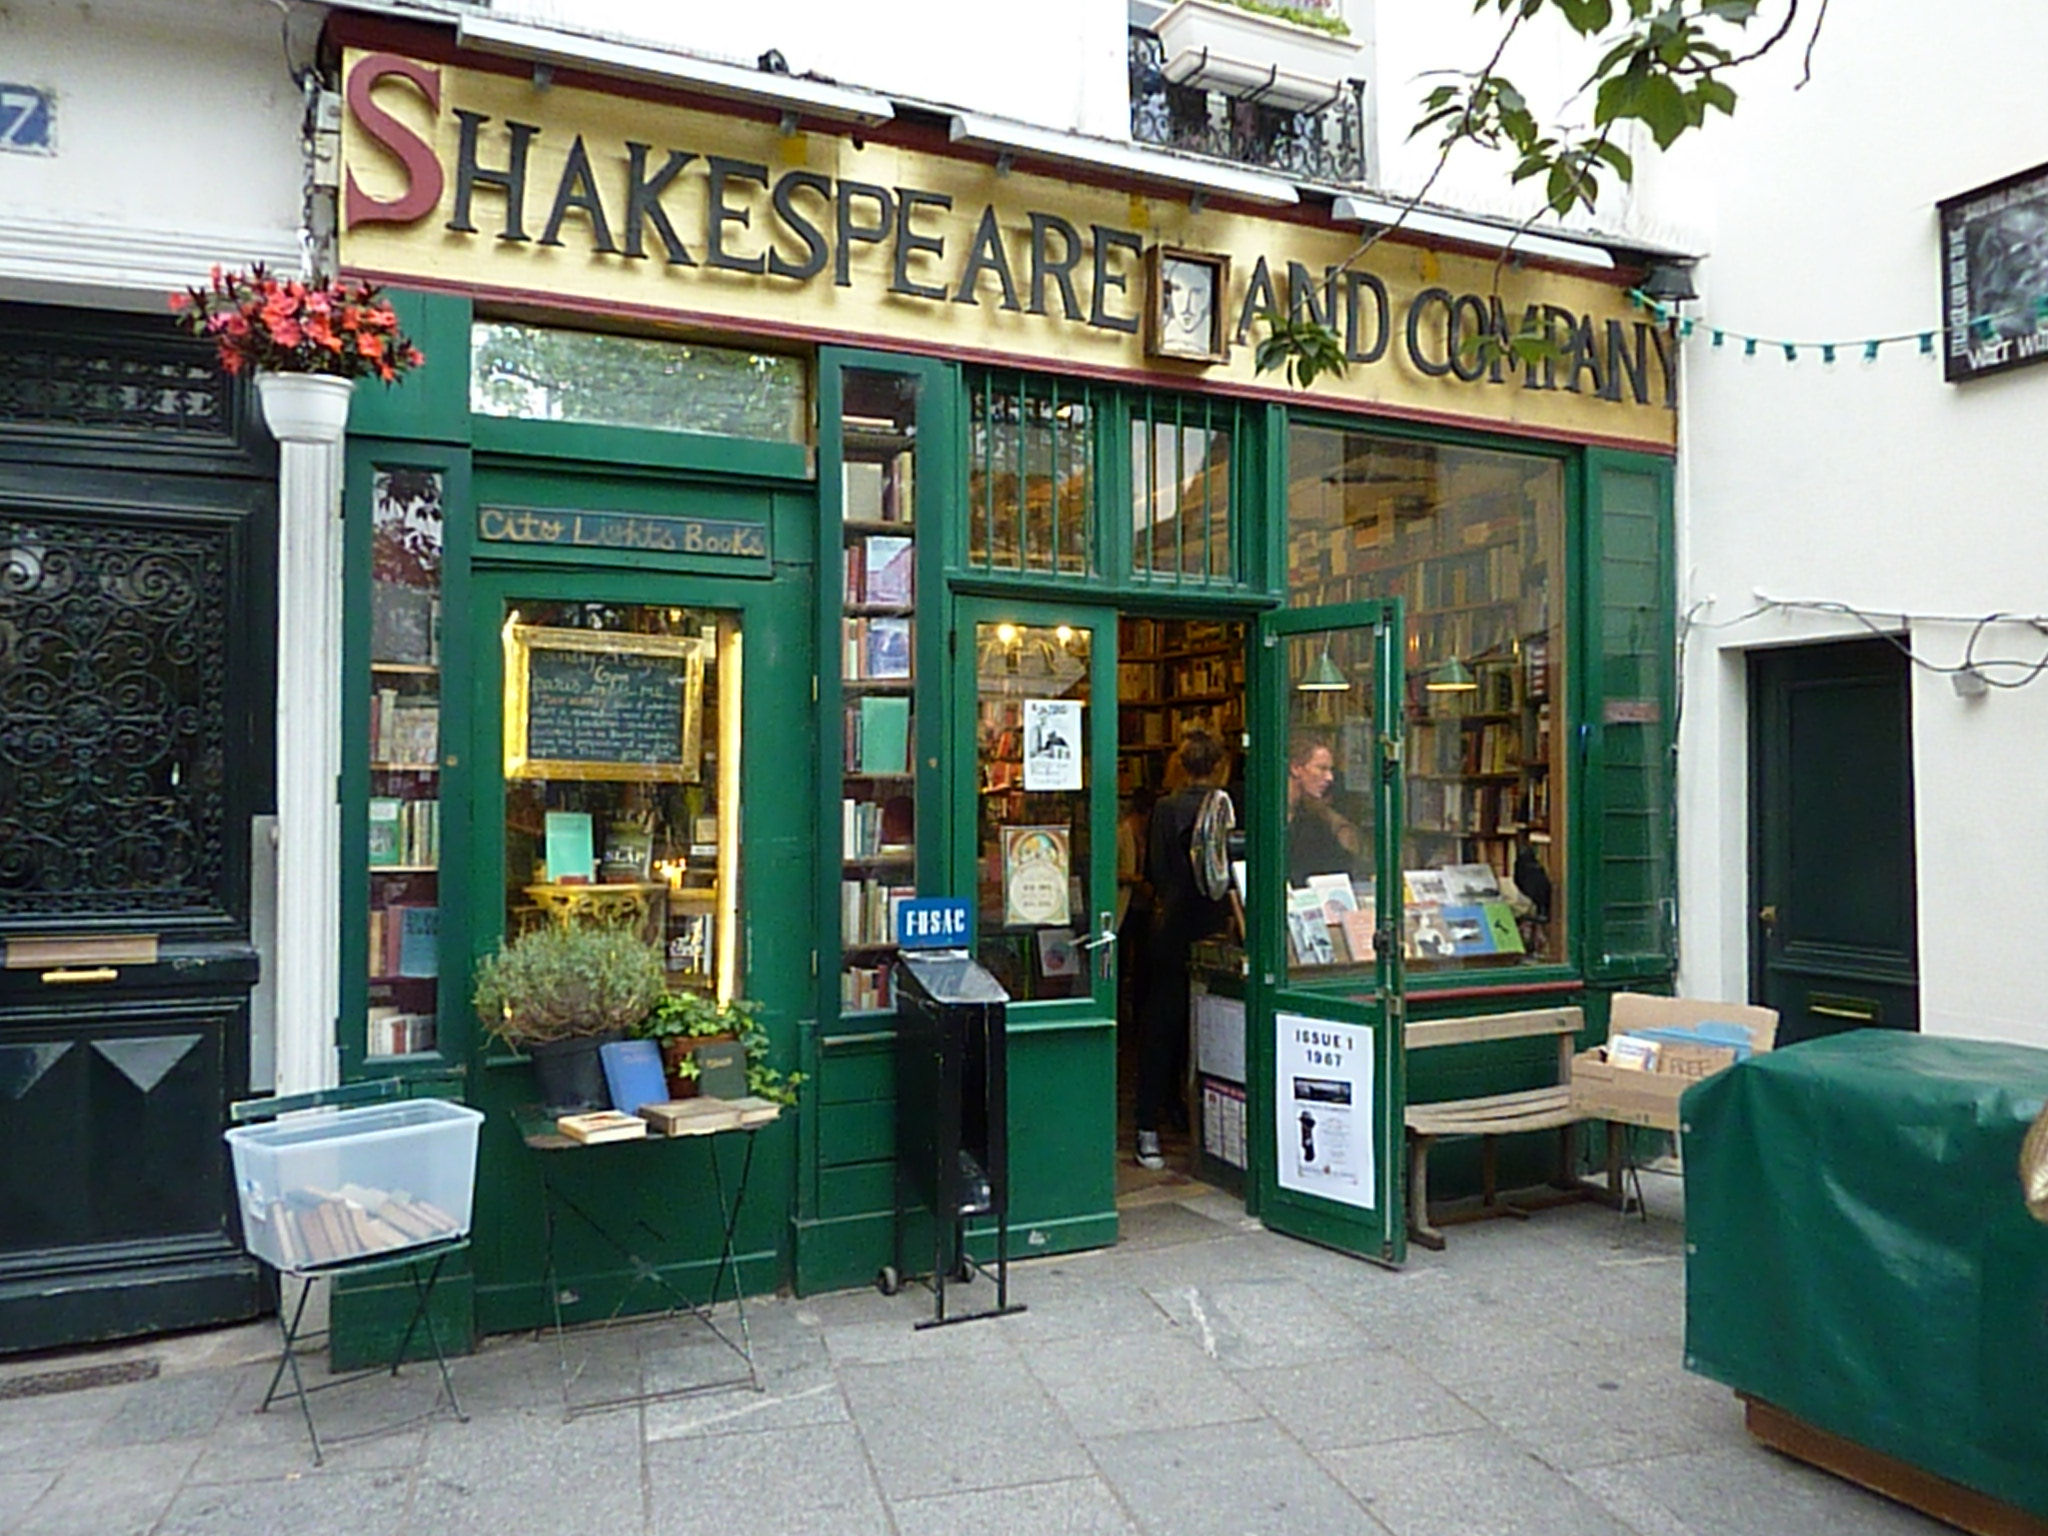 An Evening at Shakespeare and Company « Paris Insights – The Blog